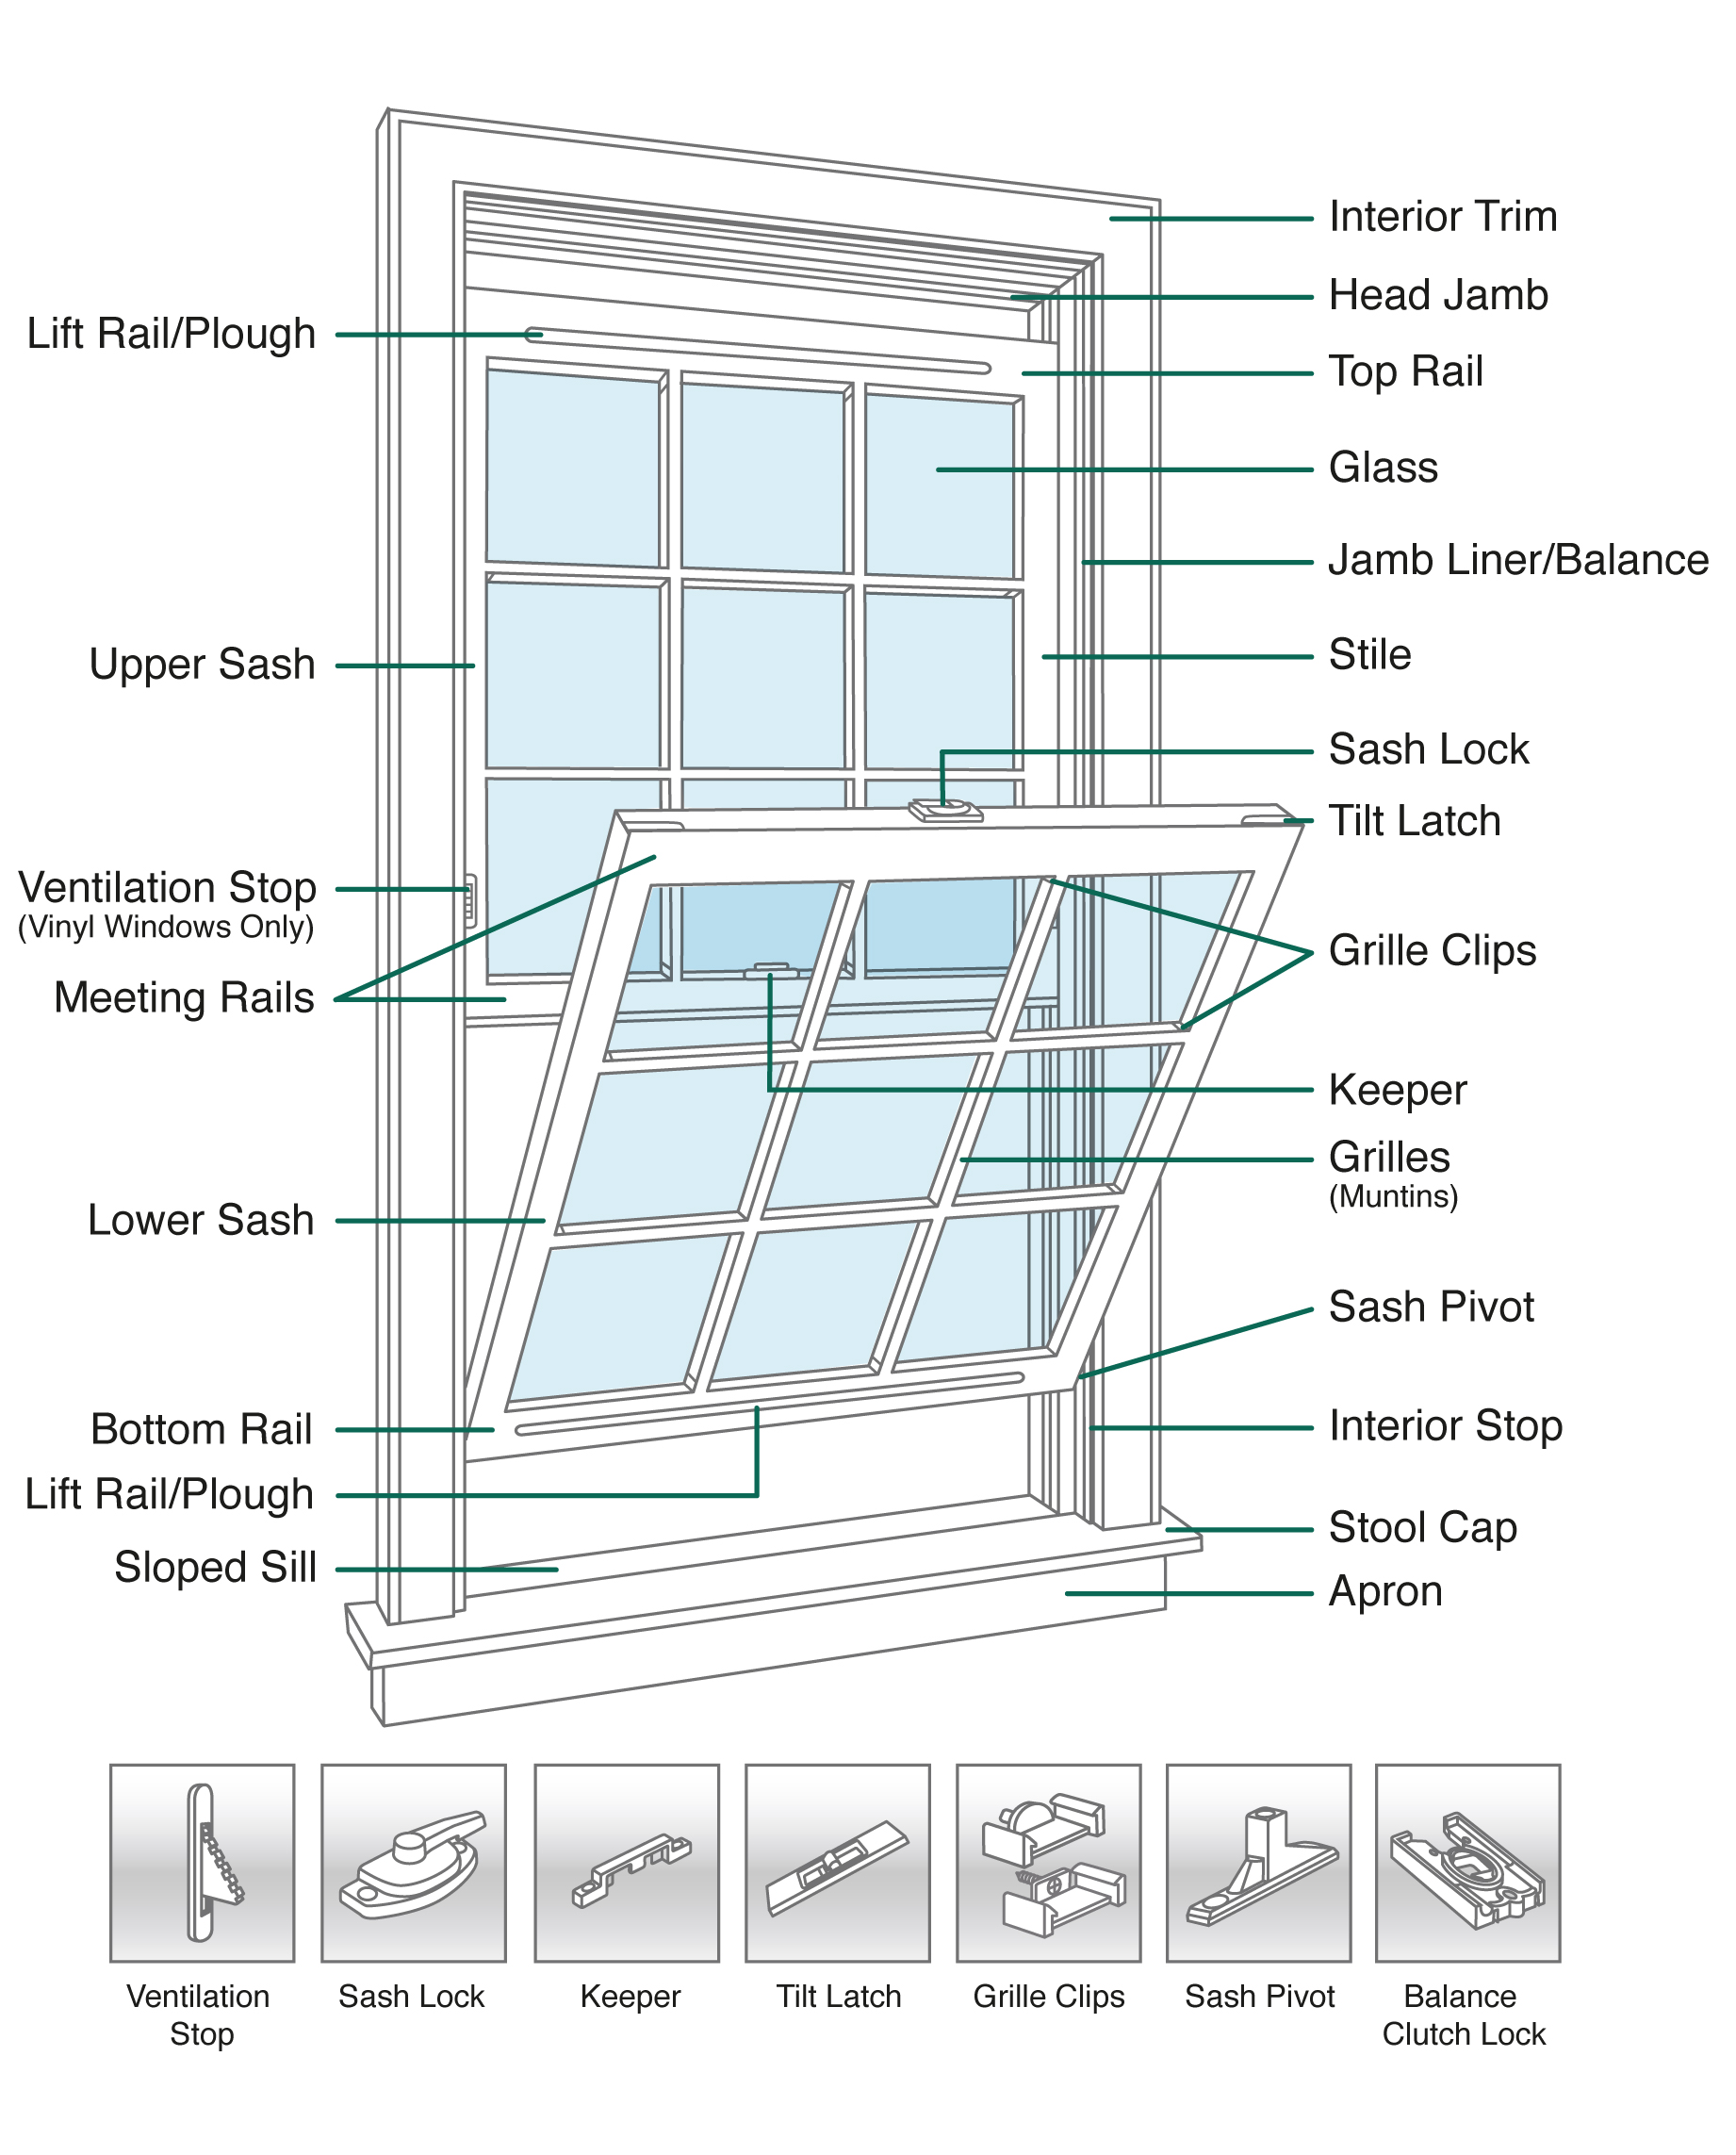 RIVCO Double-Hung Window. PLEASE NOTE: This diagram is © The Window Medics NE. If you see it on any other website or page, the people who have stolen it are likely advertising the availability of parts they cannot get, and may rip you off. The Windows Medics NE is the exclusive provider of OEM and OEM-quality parts for RIVCO windows.